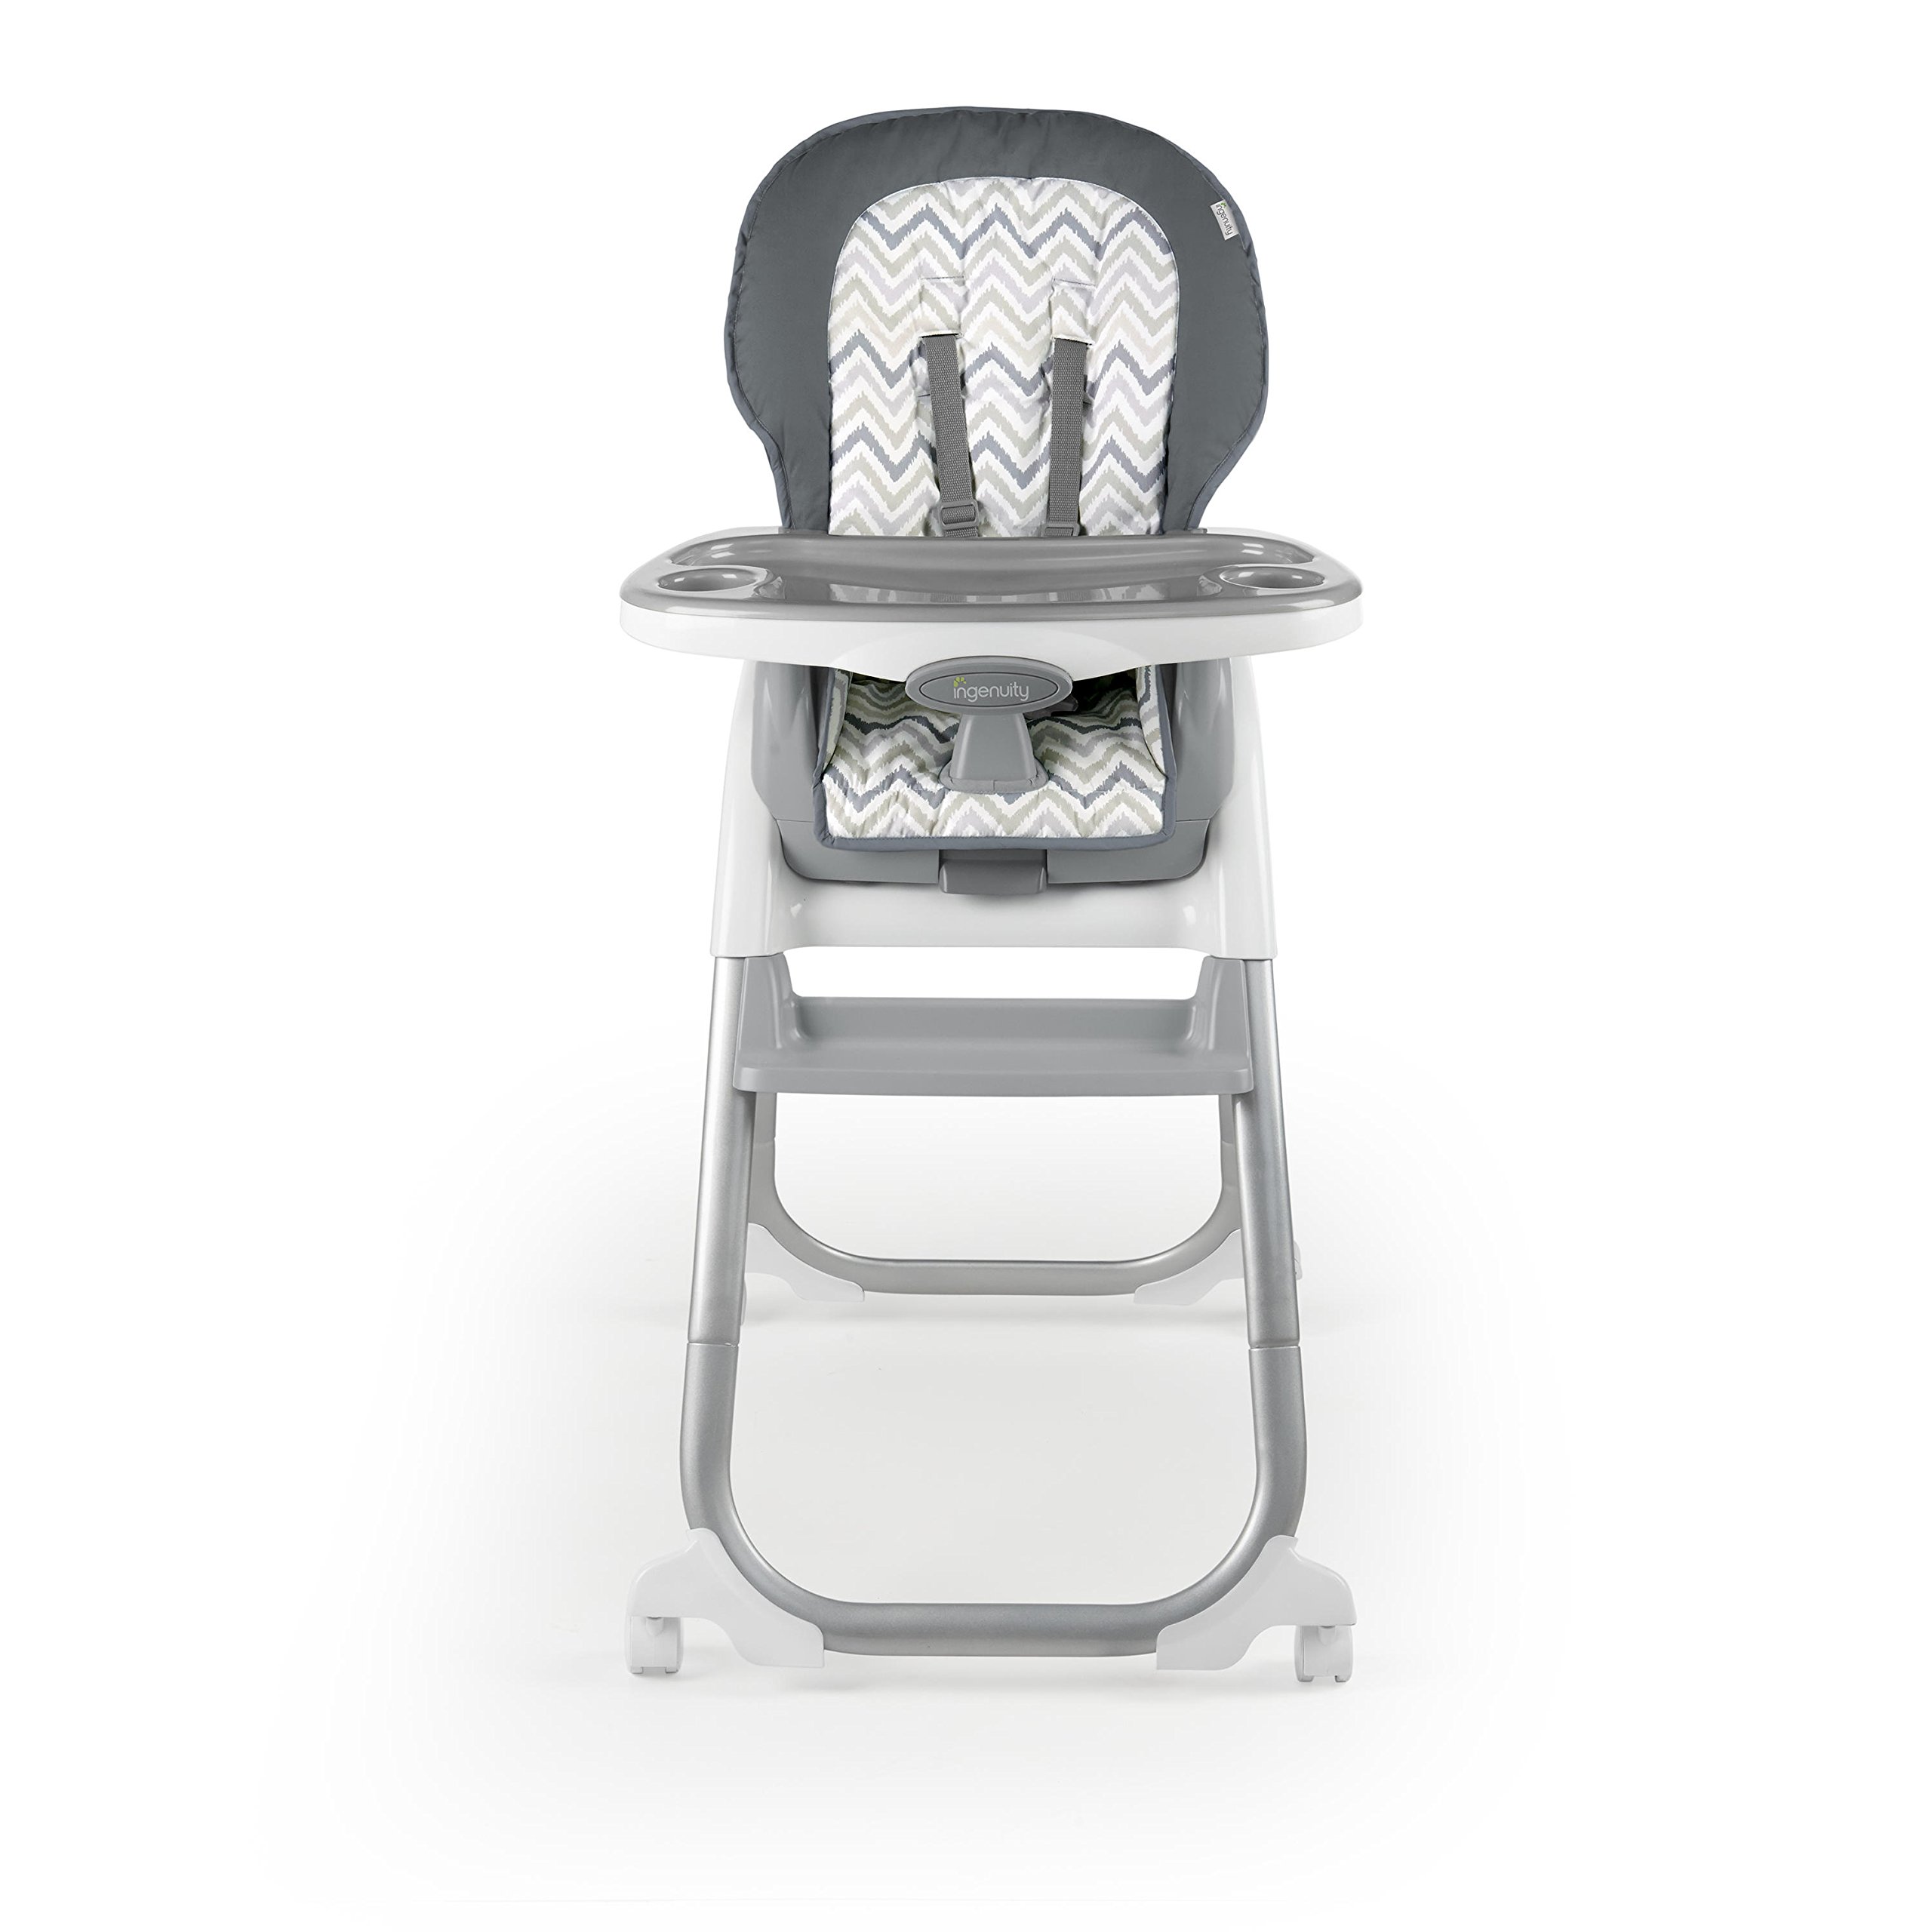 Ingenuity Trio Elite 3-in-1 High Chair Braden - High Chair, Toddler Chair, and Booster